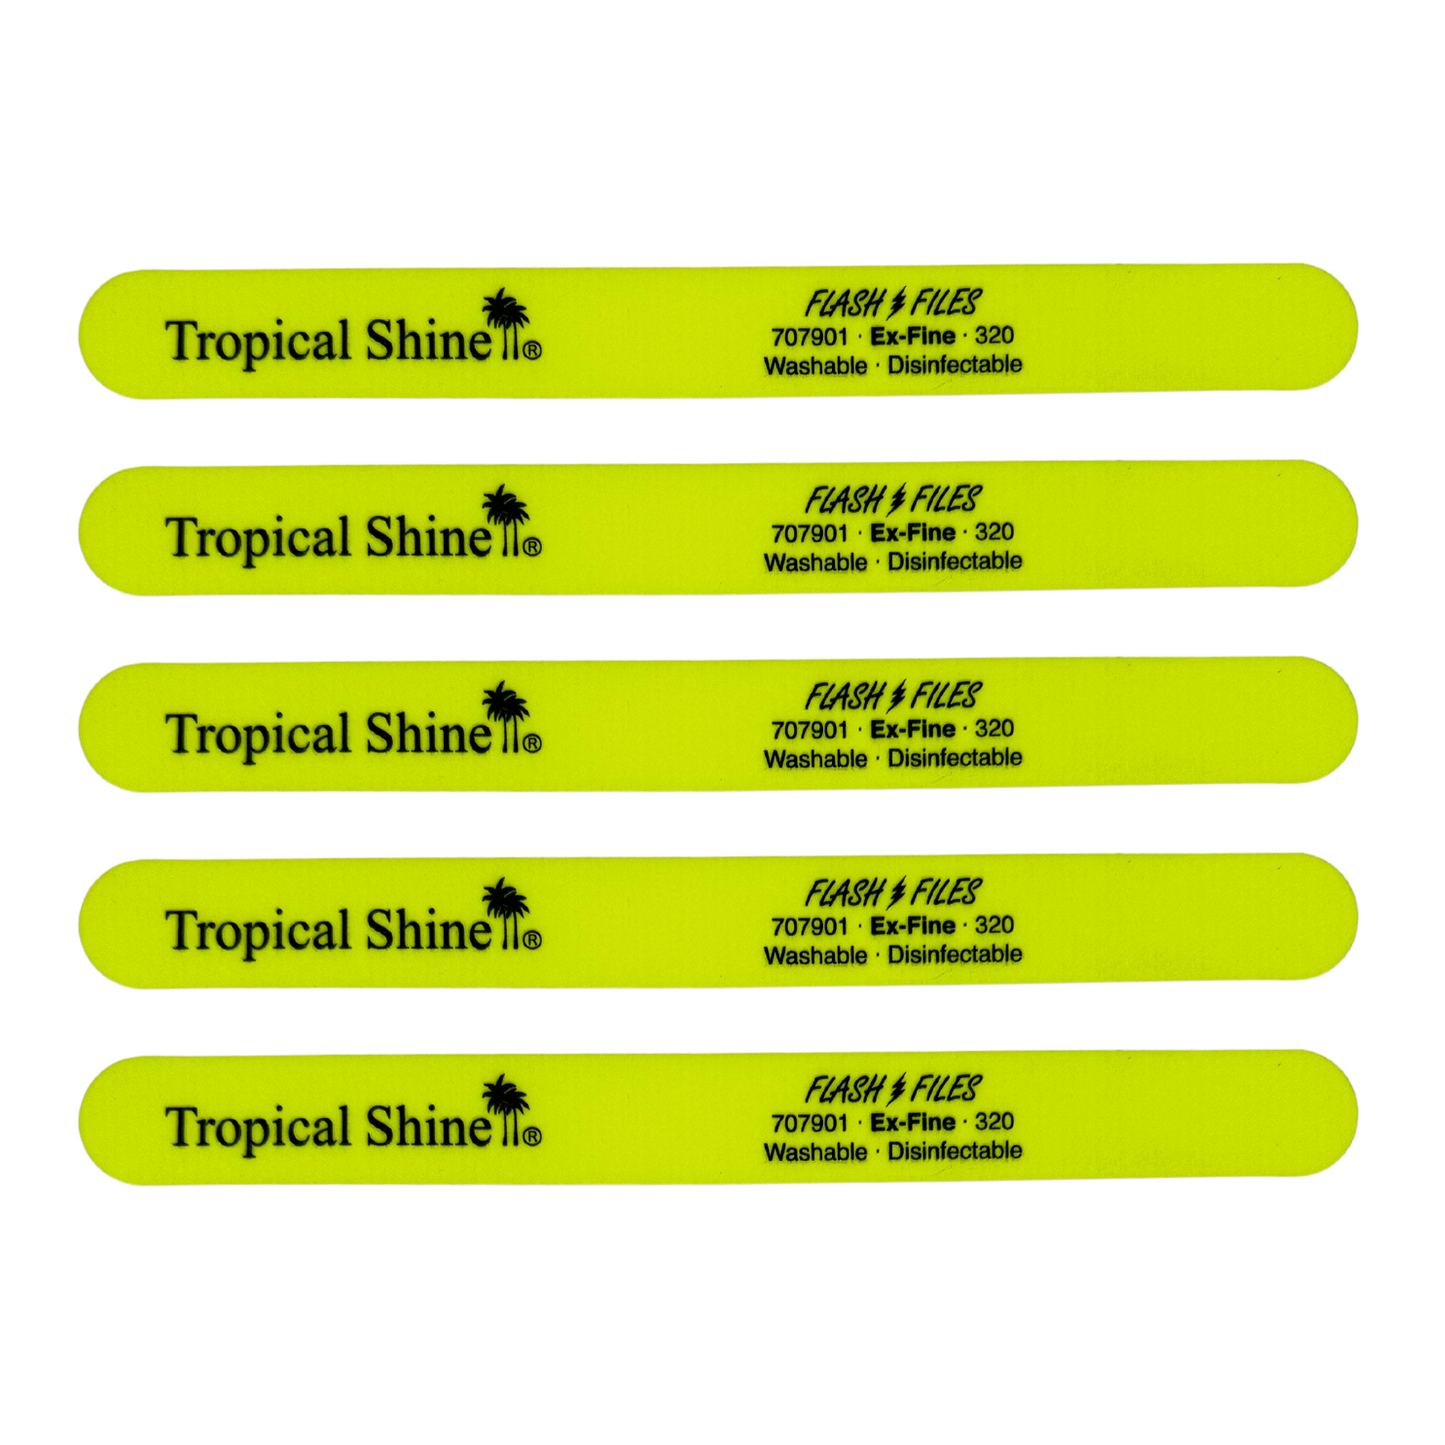 Tropical Shine Salon Boards - 5-Pack Cushioned Nail Files, Extra-Fine 320 Grit